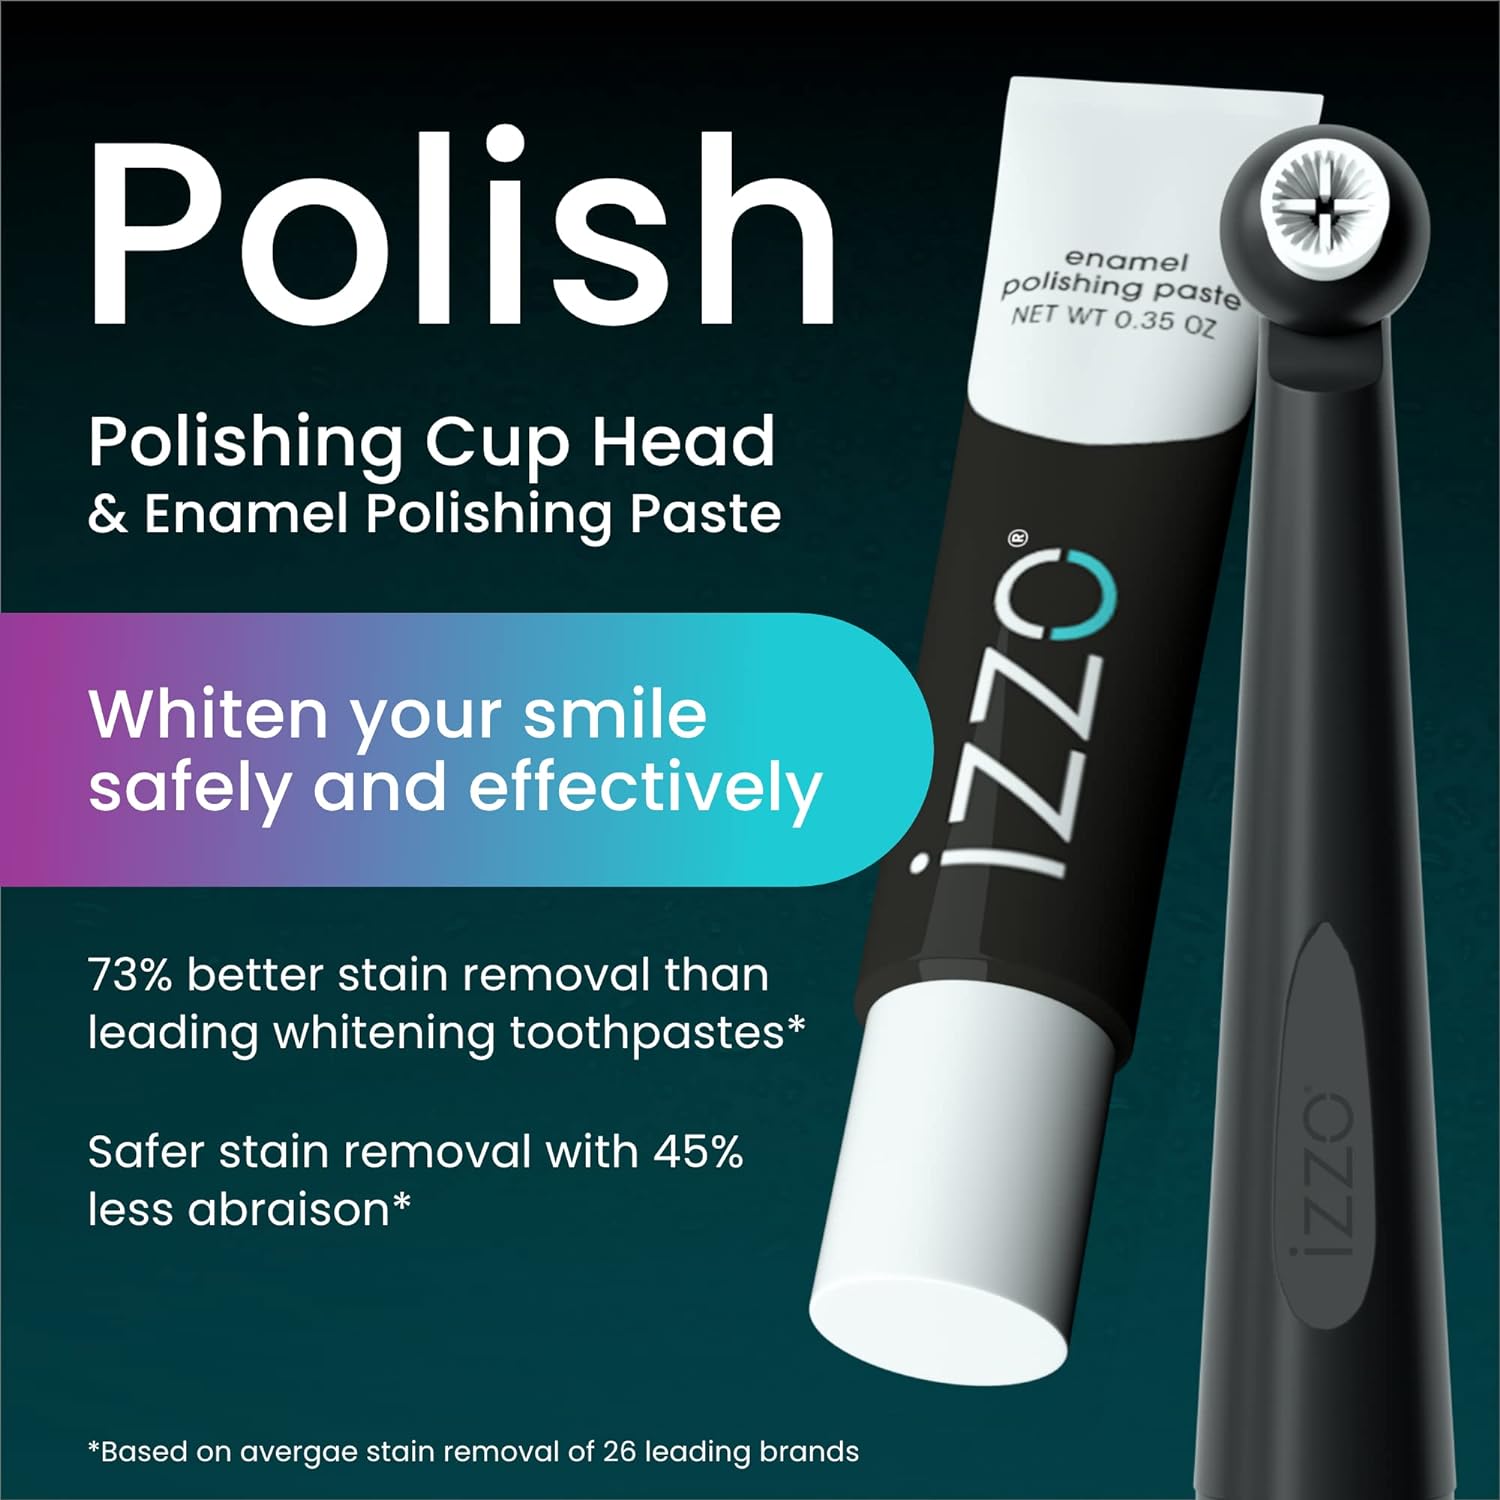 izzo Oral Care Kit, Electric Toothbrush, Teeth Whitener, Polisher Head, UV Cleaner and Scaler